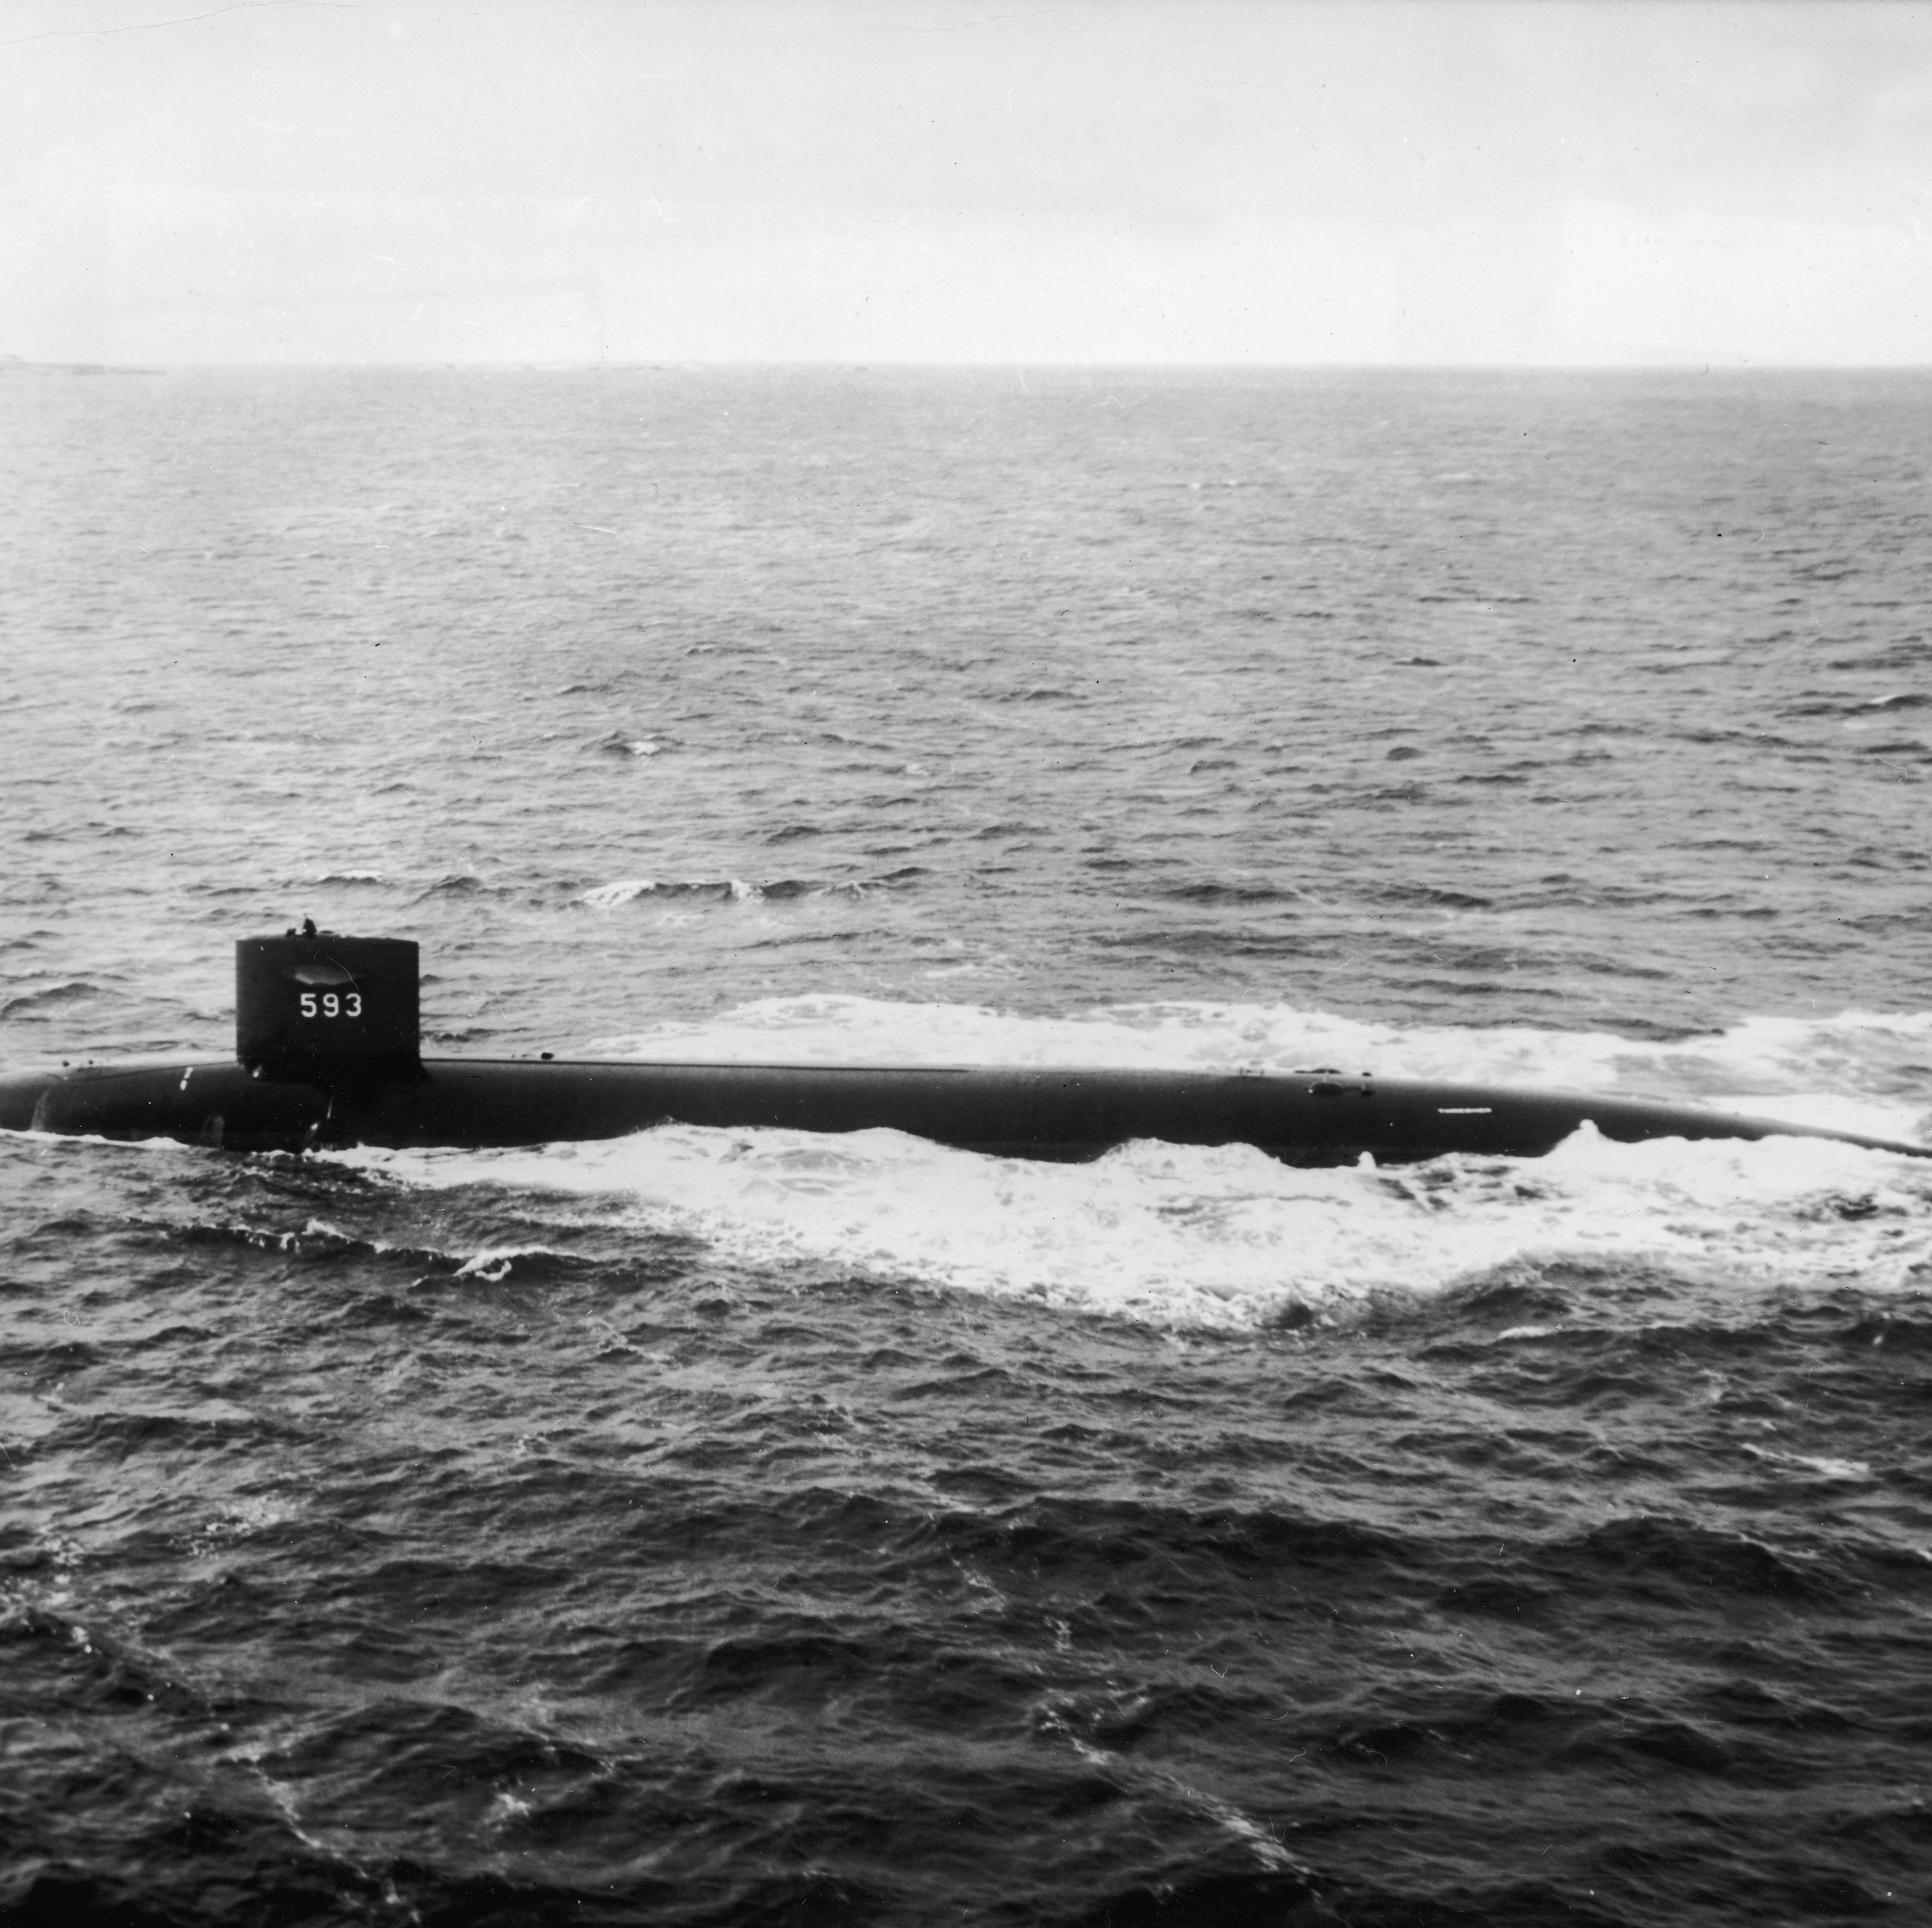 Why Did the USS Thresher Sink? New Declassified Documents Reveal the Truth